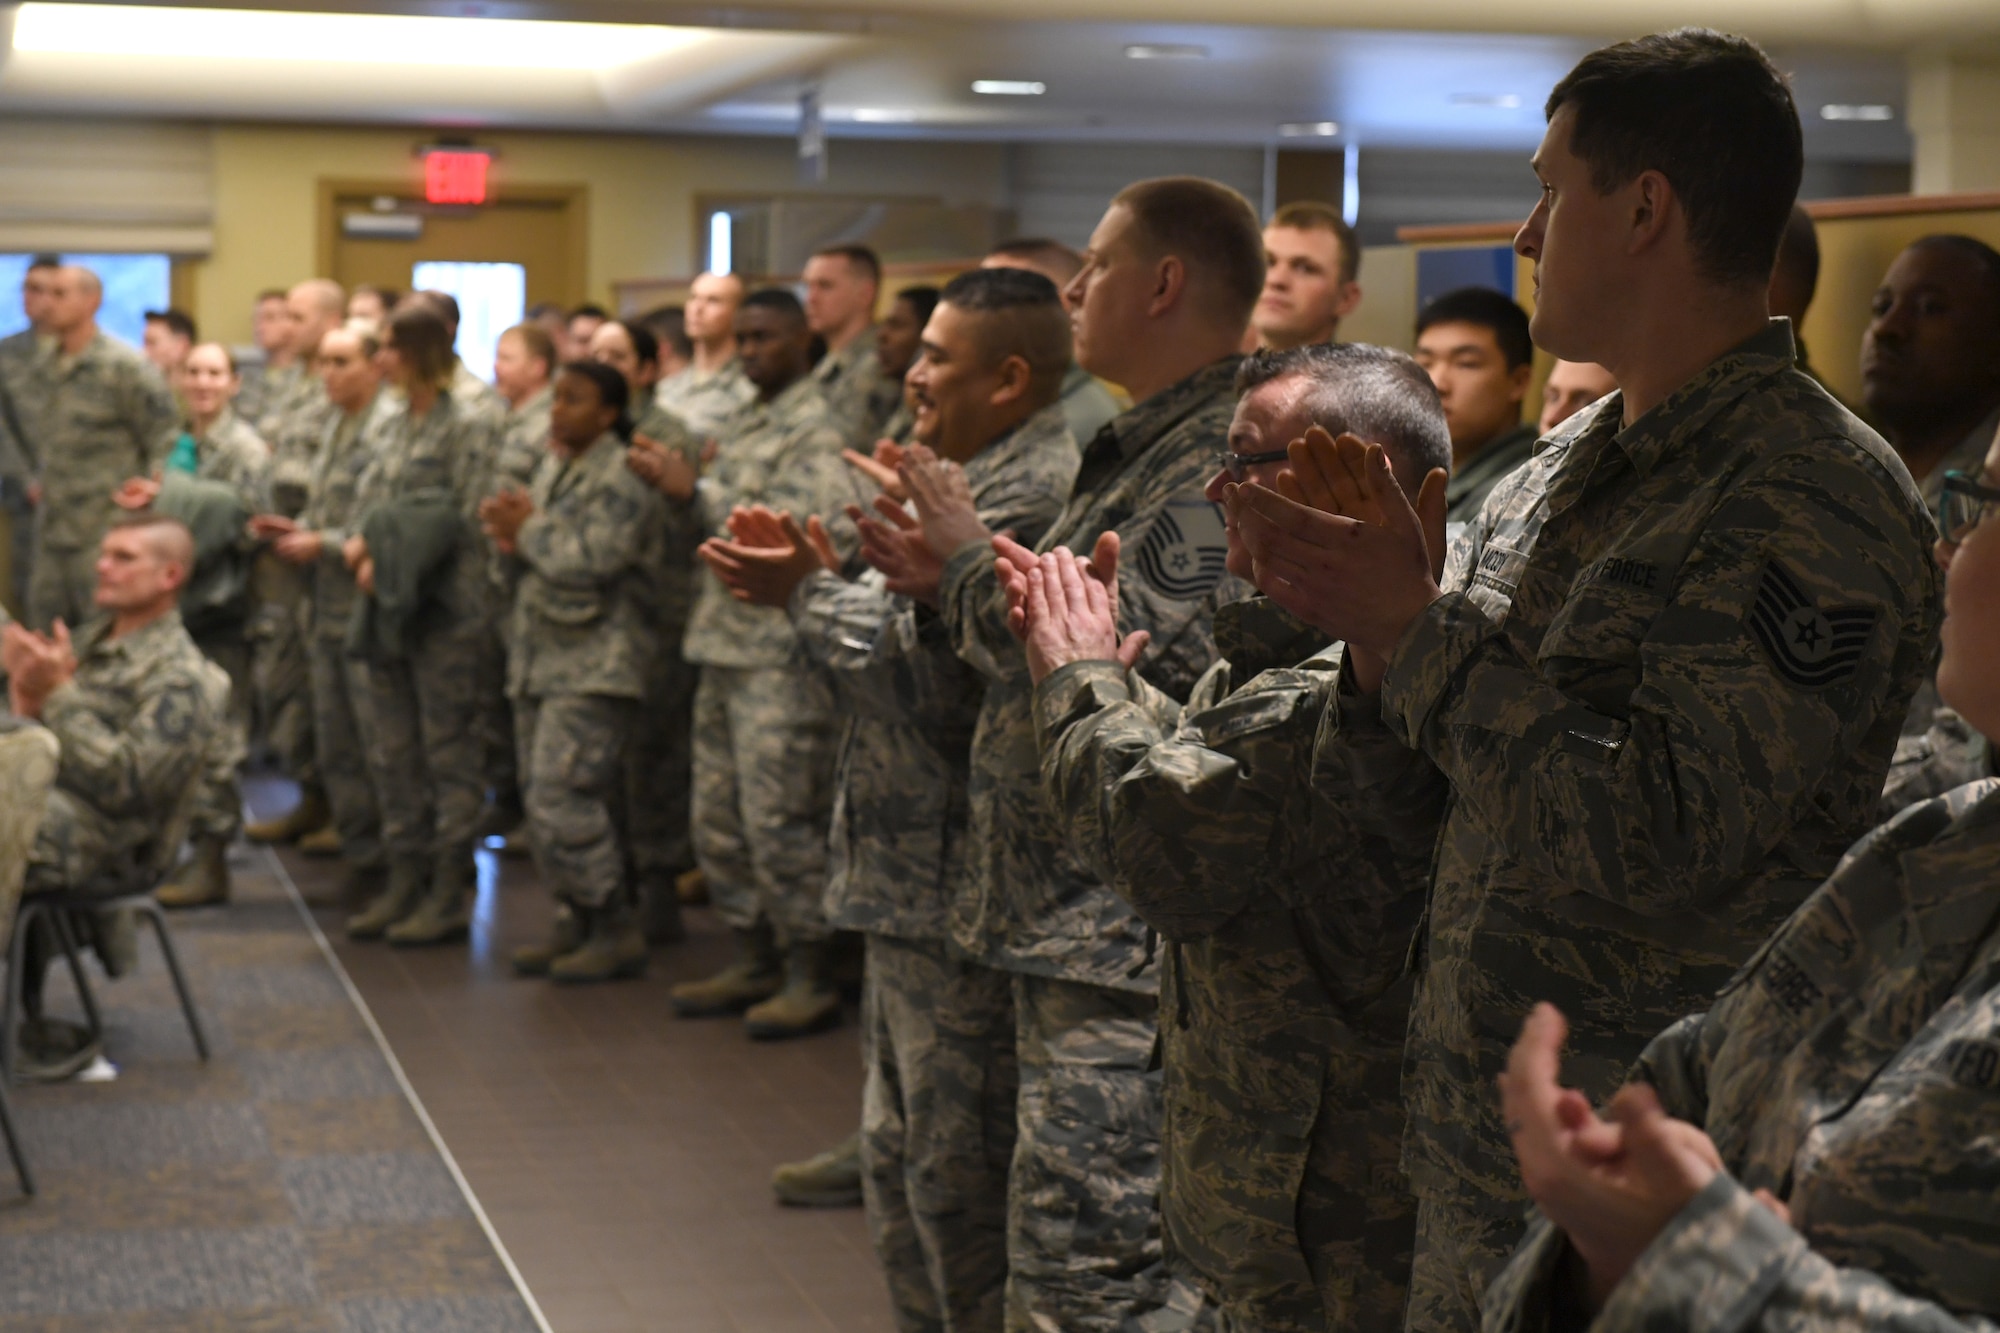 Airmen gather to formally recognize their peers at the 2019 911th Airlift Wing Awards Ceremony at the Pittsburgh International Airport Air Reserve Station, Pennsylvania, March 2, 2019. This ceremony recognized Airmen who were awarded of-the-year titles, as well as the recipient of the Command Chief Fahrny Diamond Sharp Award. (U.S. Air Force photo by Senior Airman James Fritz)